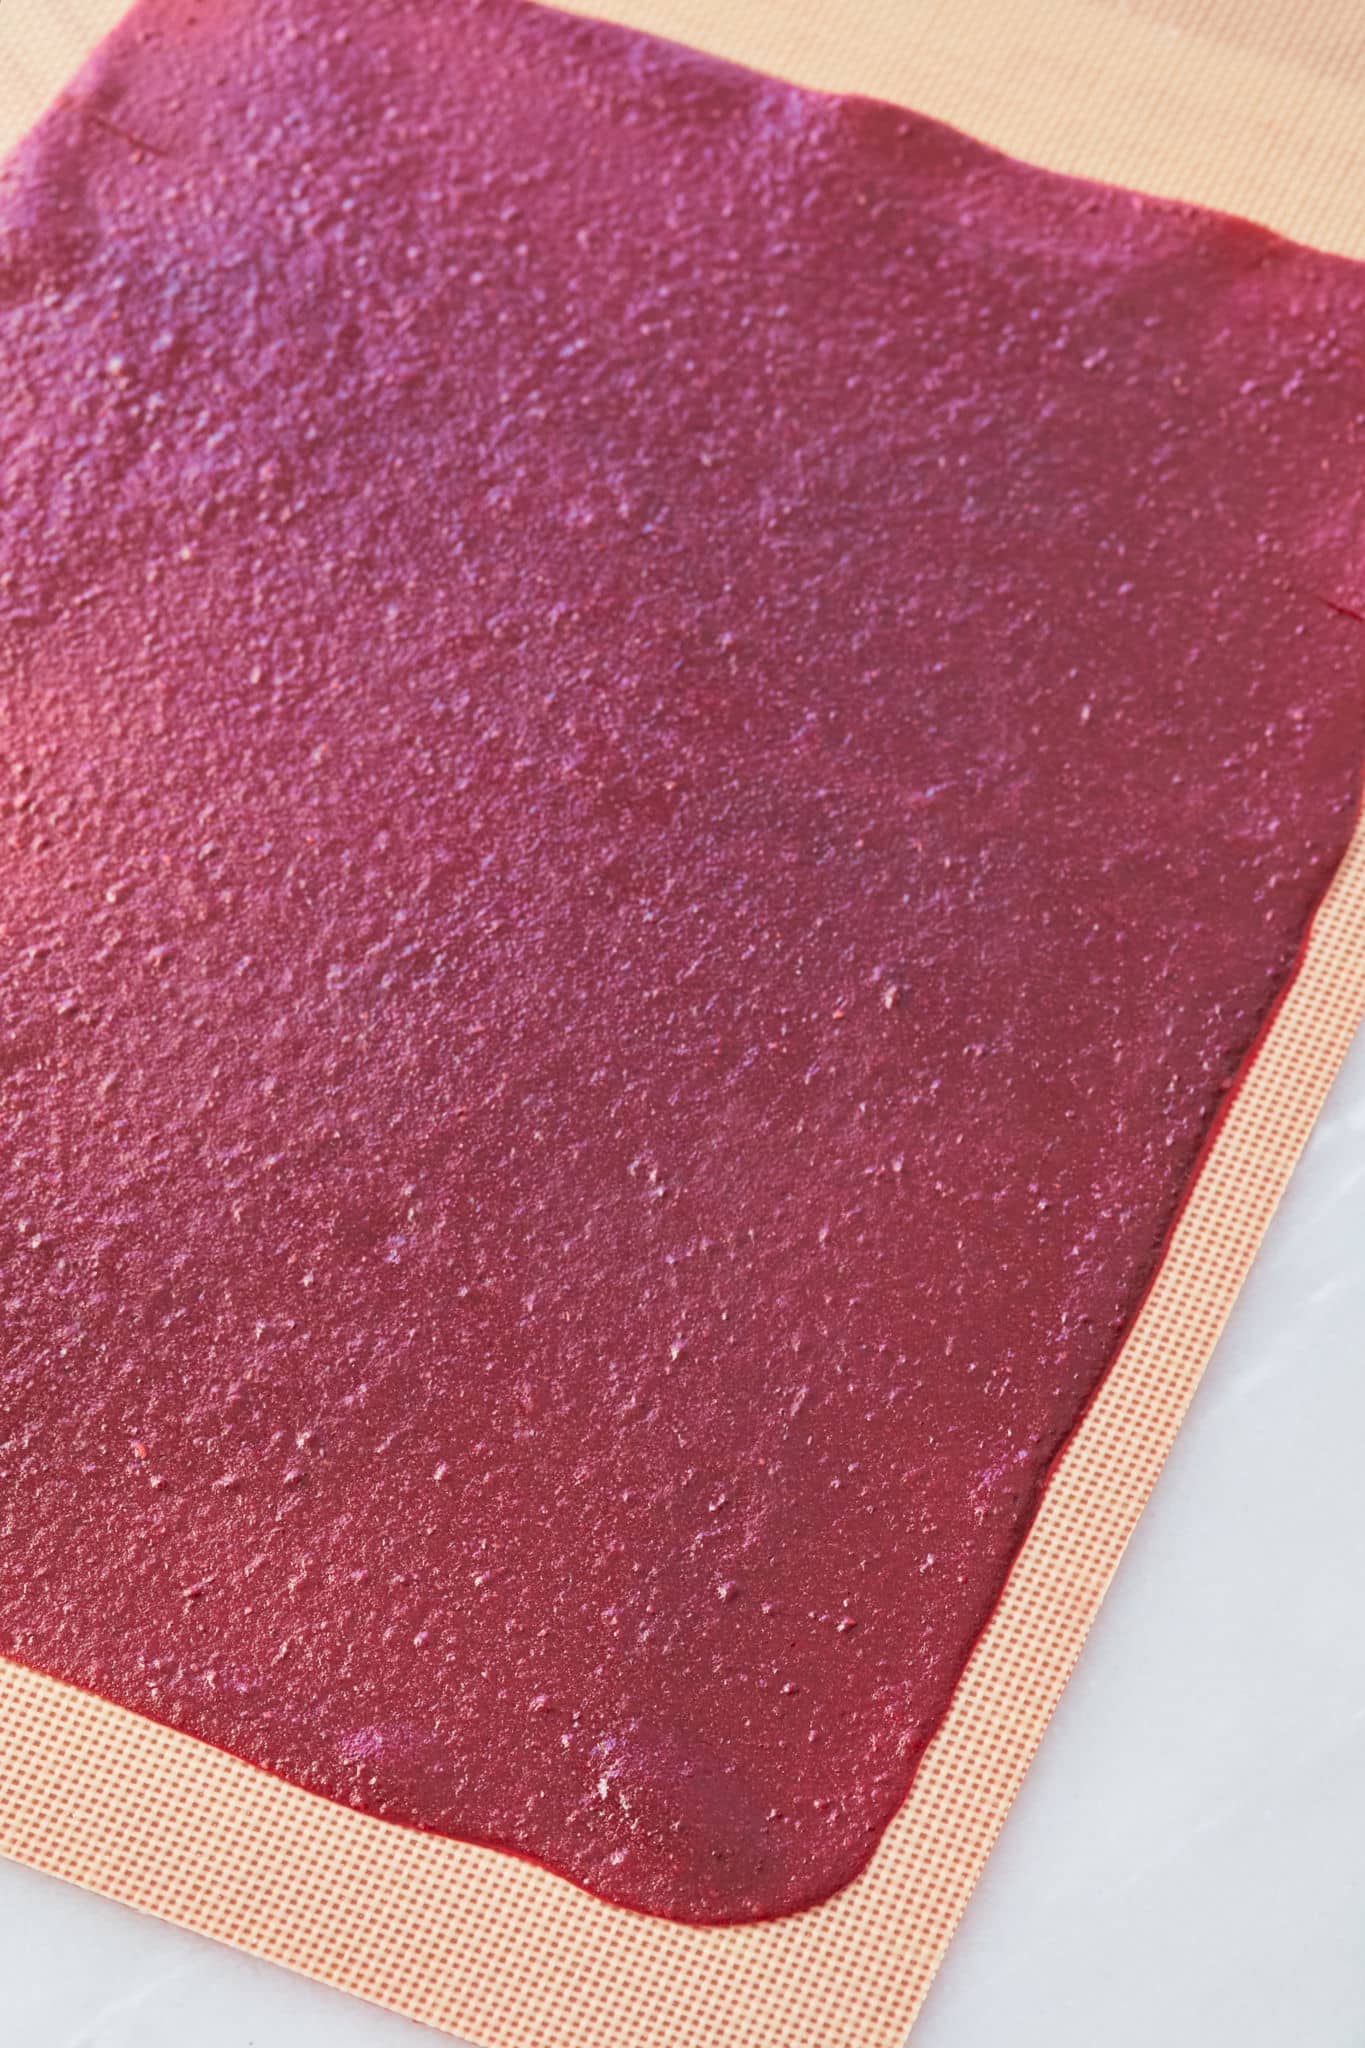 A thin layer of puree used to make raspberry leather is spread on a silicone baking sheet after baking.